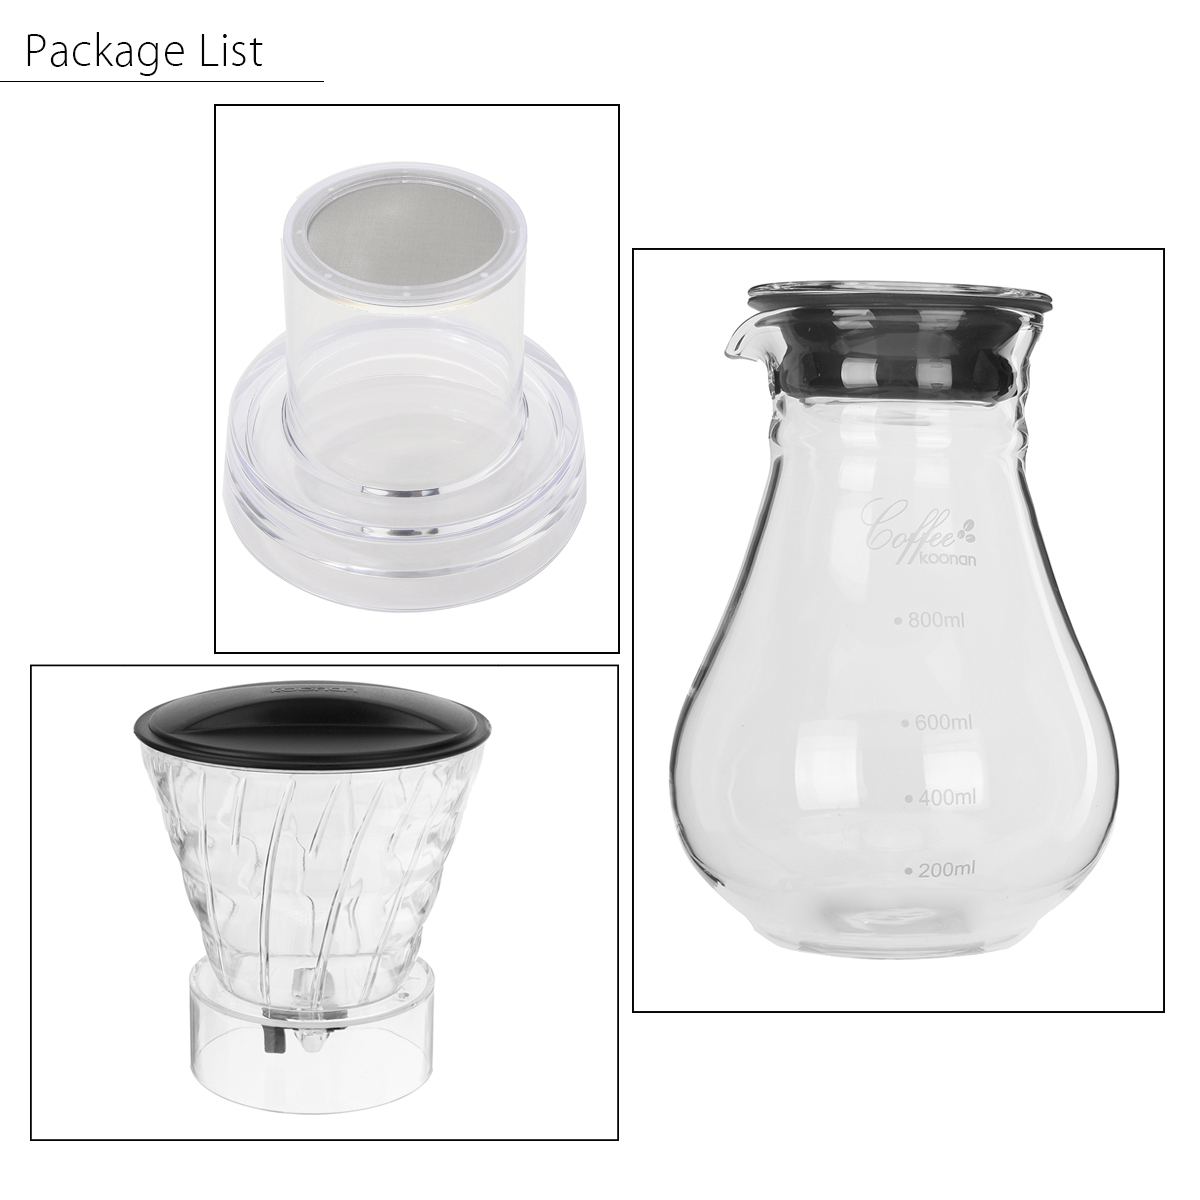 1000mL-Glass-Cold-Iced-Drip-Brew-Home-Coffee-Maker-Pot-Pour-Over-Coffee-Maker-Coffee-Machine-1315102-8